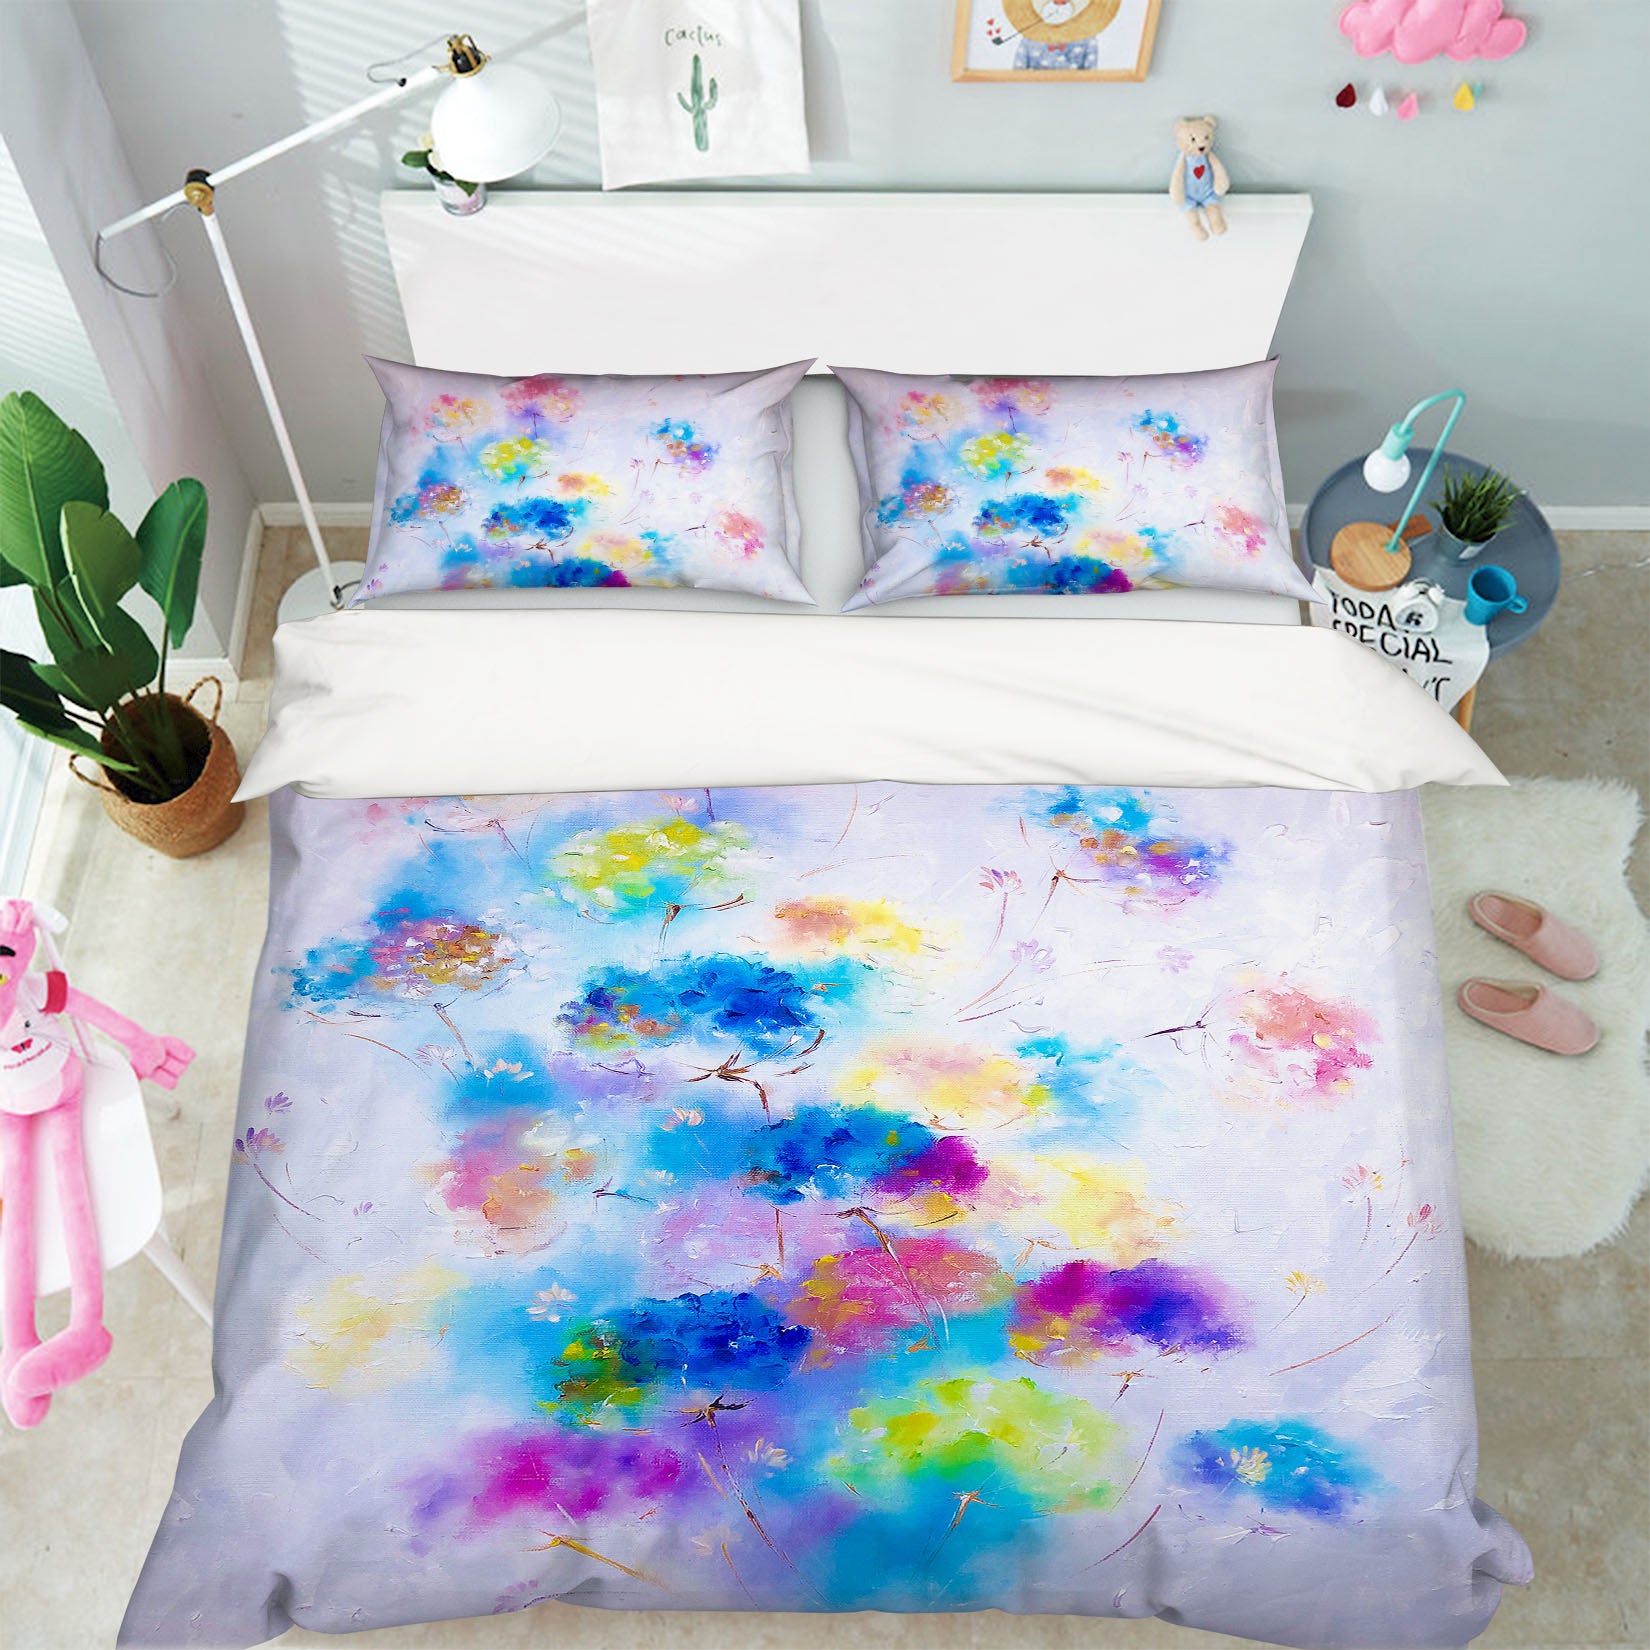 3D Colorful Flowers 599 Skromova Marina Bedding Bed Pillowcases Quilt